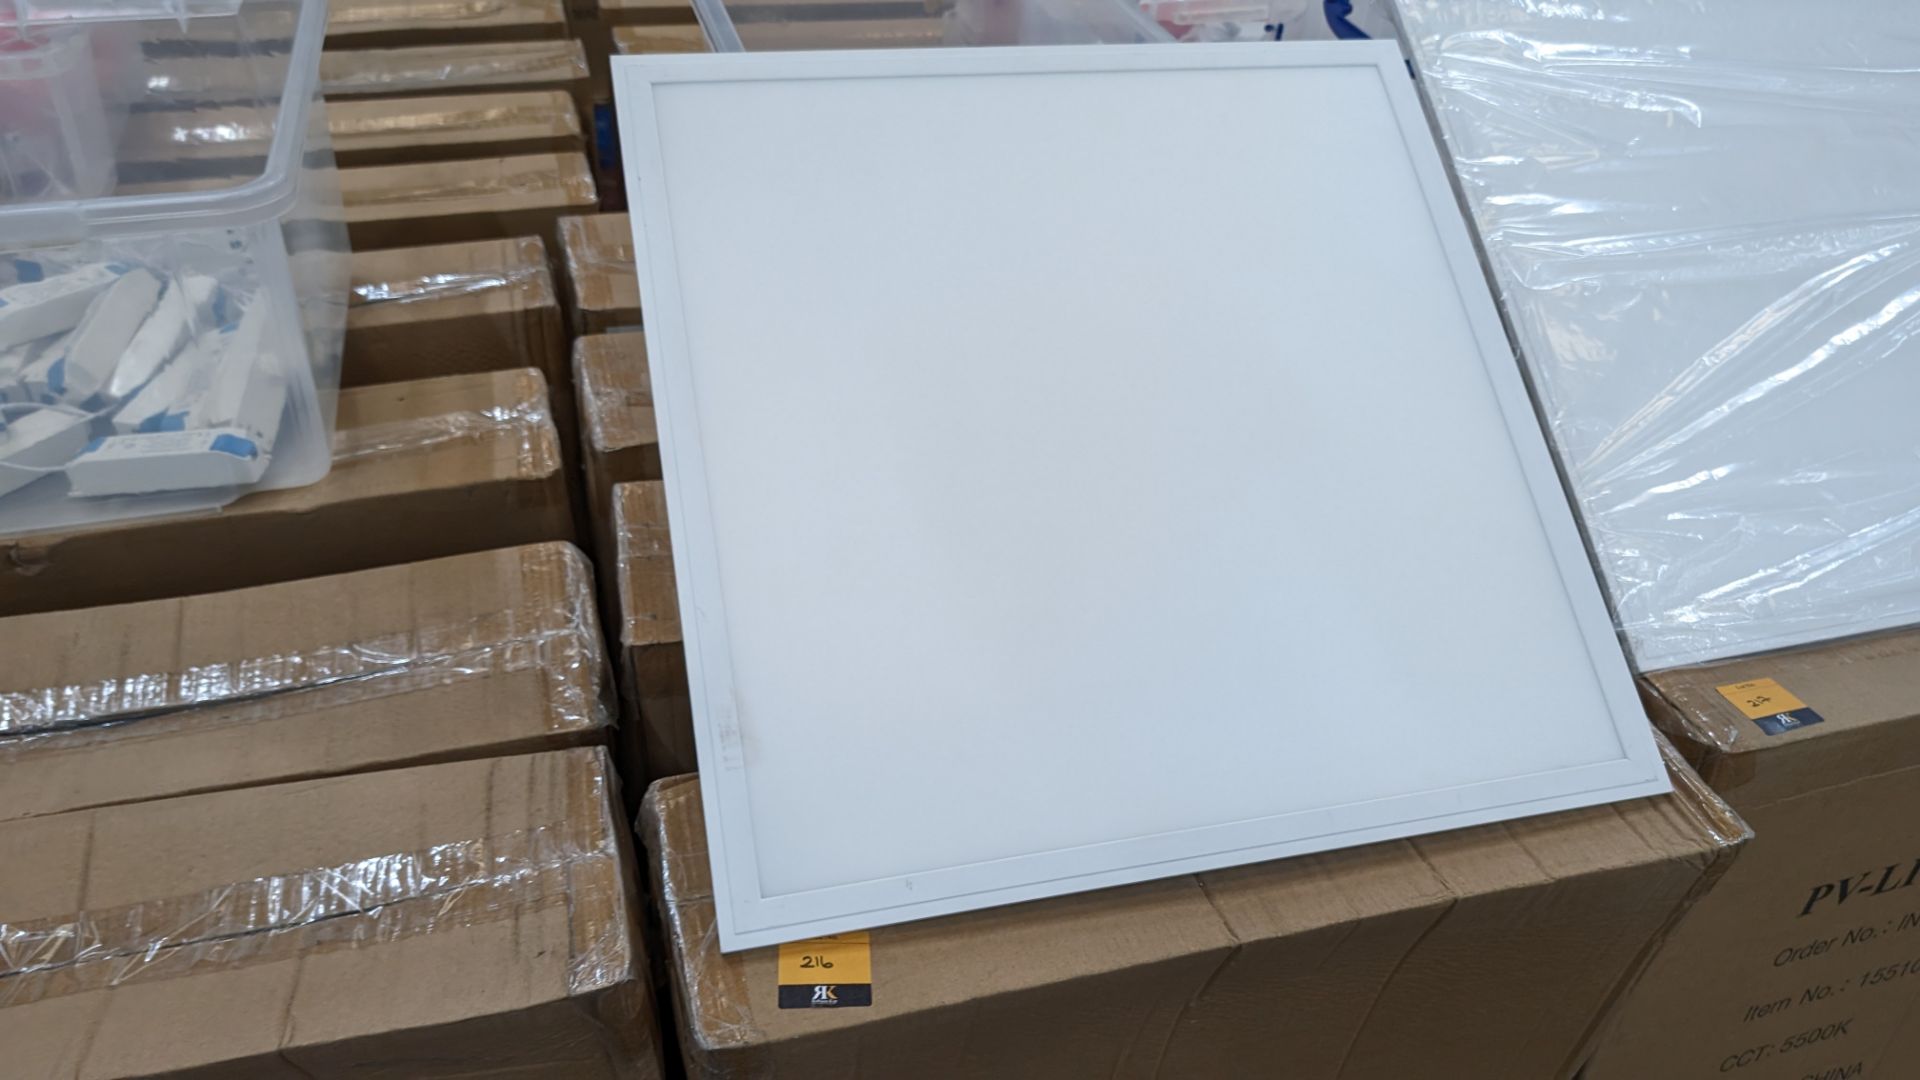 16 off 600mm x 600mm 36w 6000k 4320 lumens cold white LED lighting panels. 36w drivers. This lot c - Image 6 of 12